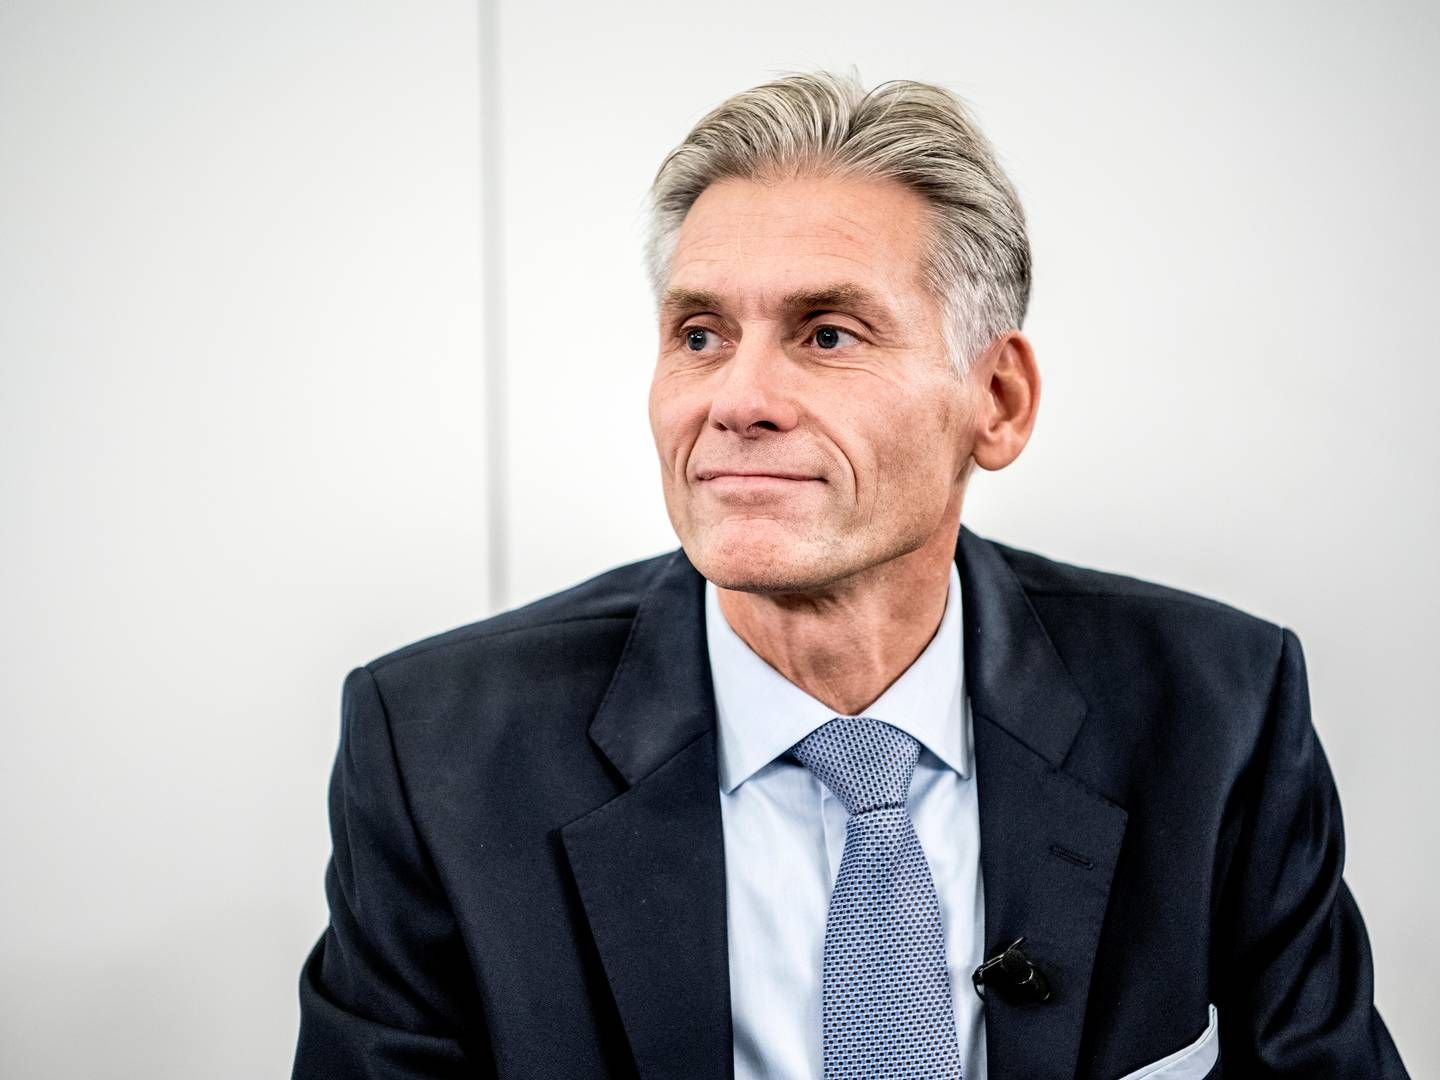 Thomas F. Borgen was CEO of Danske Bank from 2013 to 2018 before a highly publicized money laundering case forced him to resign. | Photo: Stine Bidstrup/Ritzau/Ritzau Scanpix